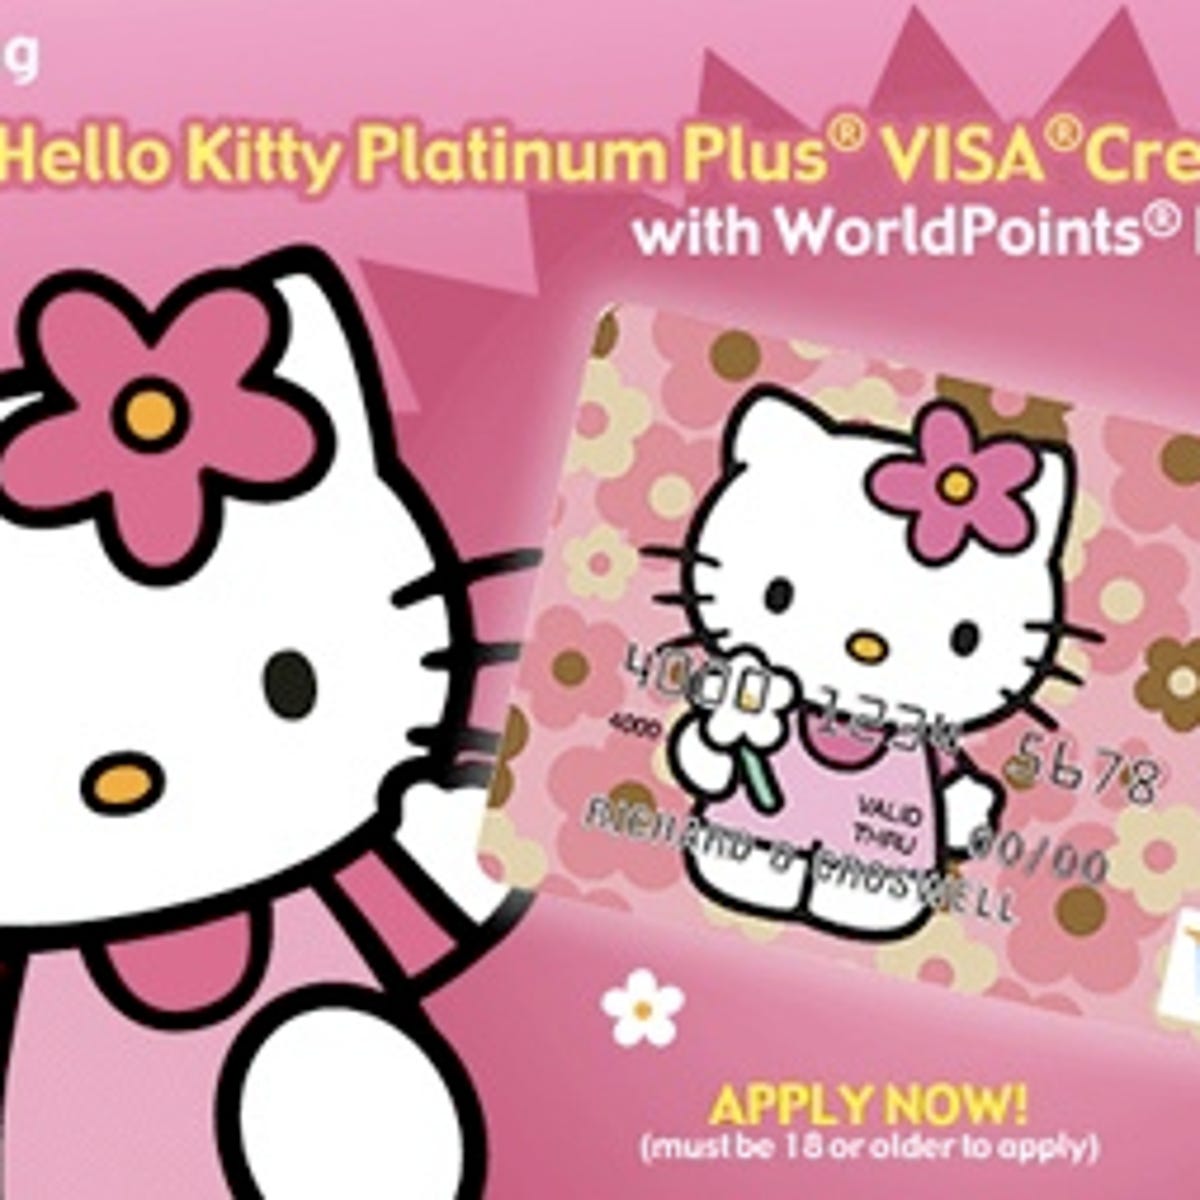 Hello Kitty wants to suck up your savings - CNET